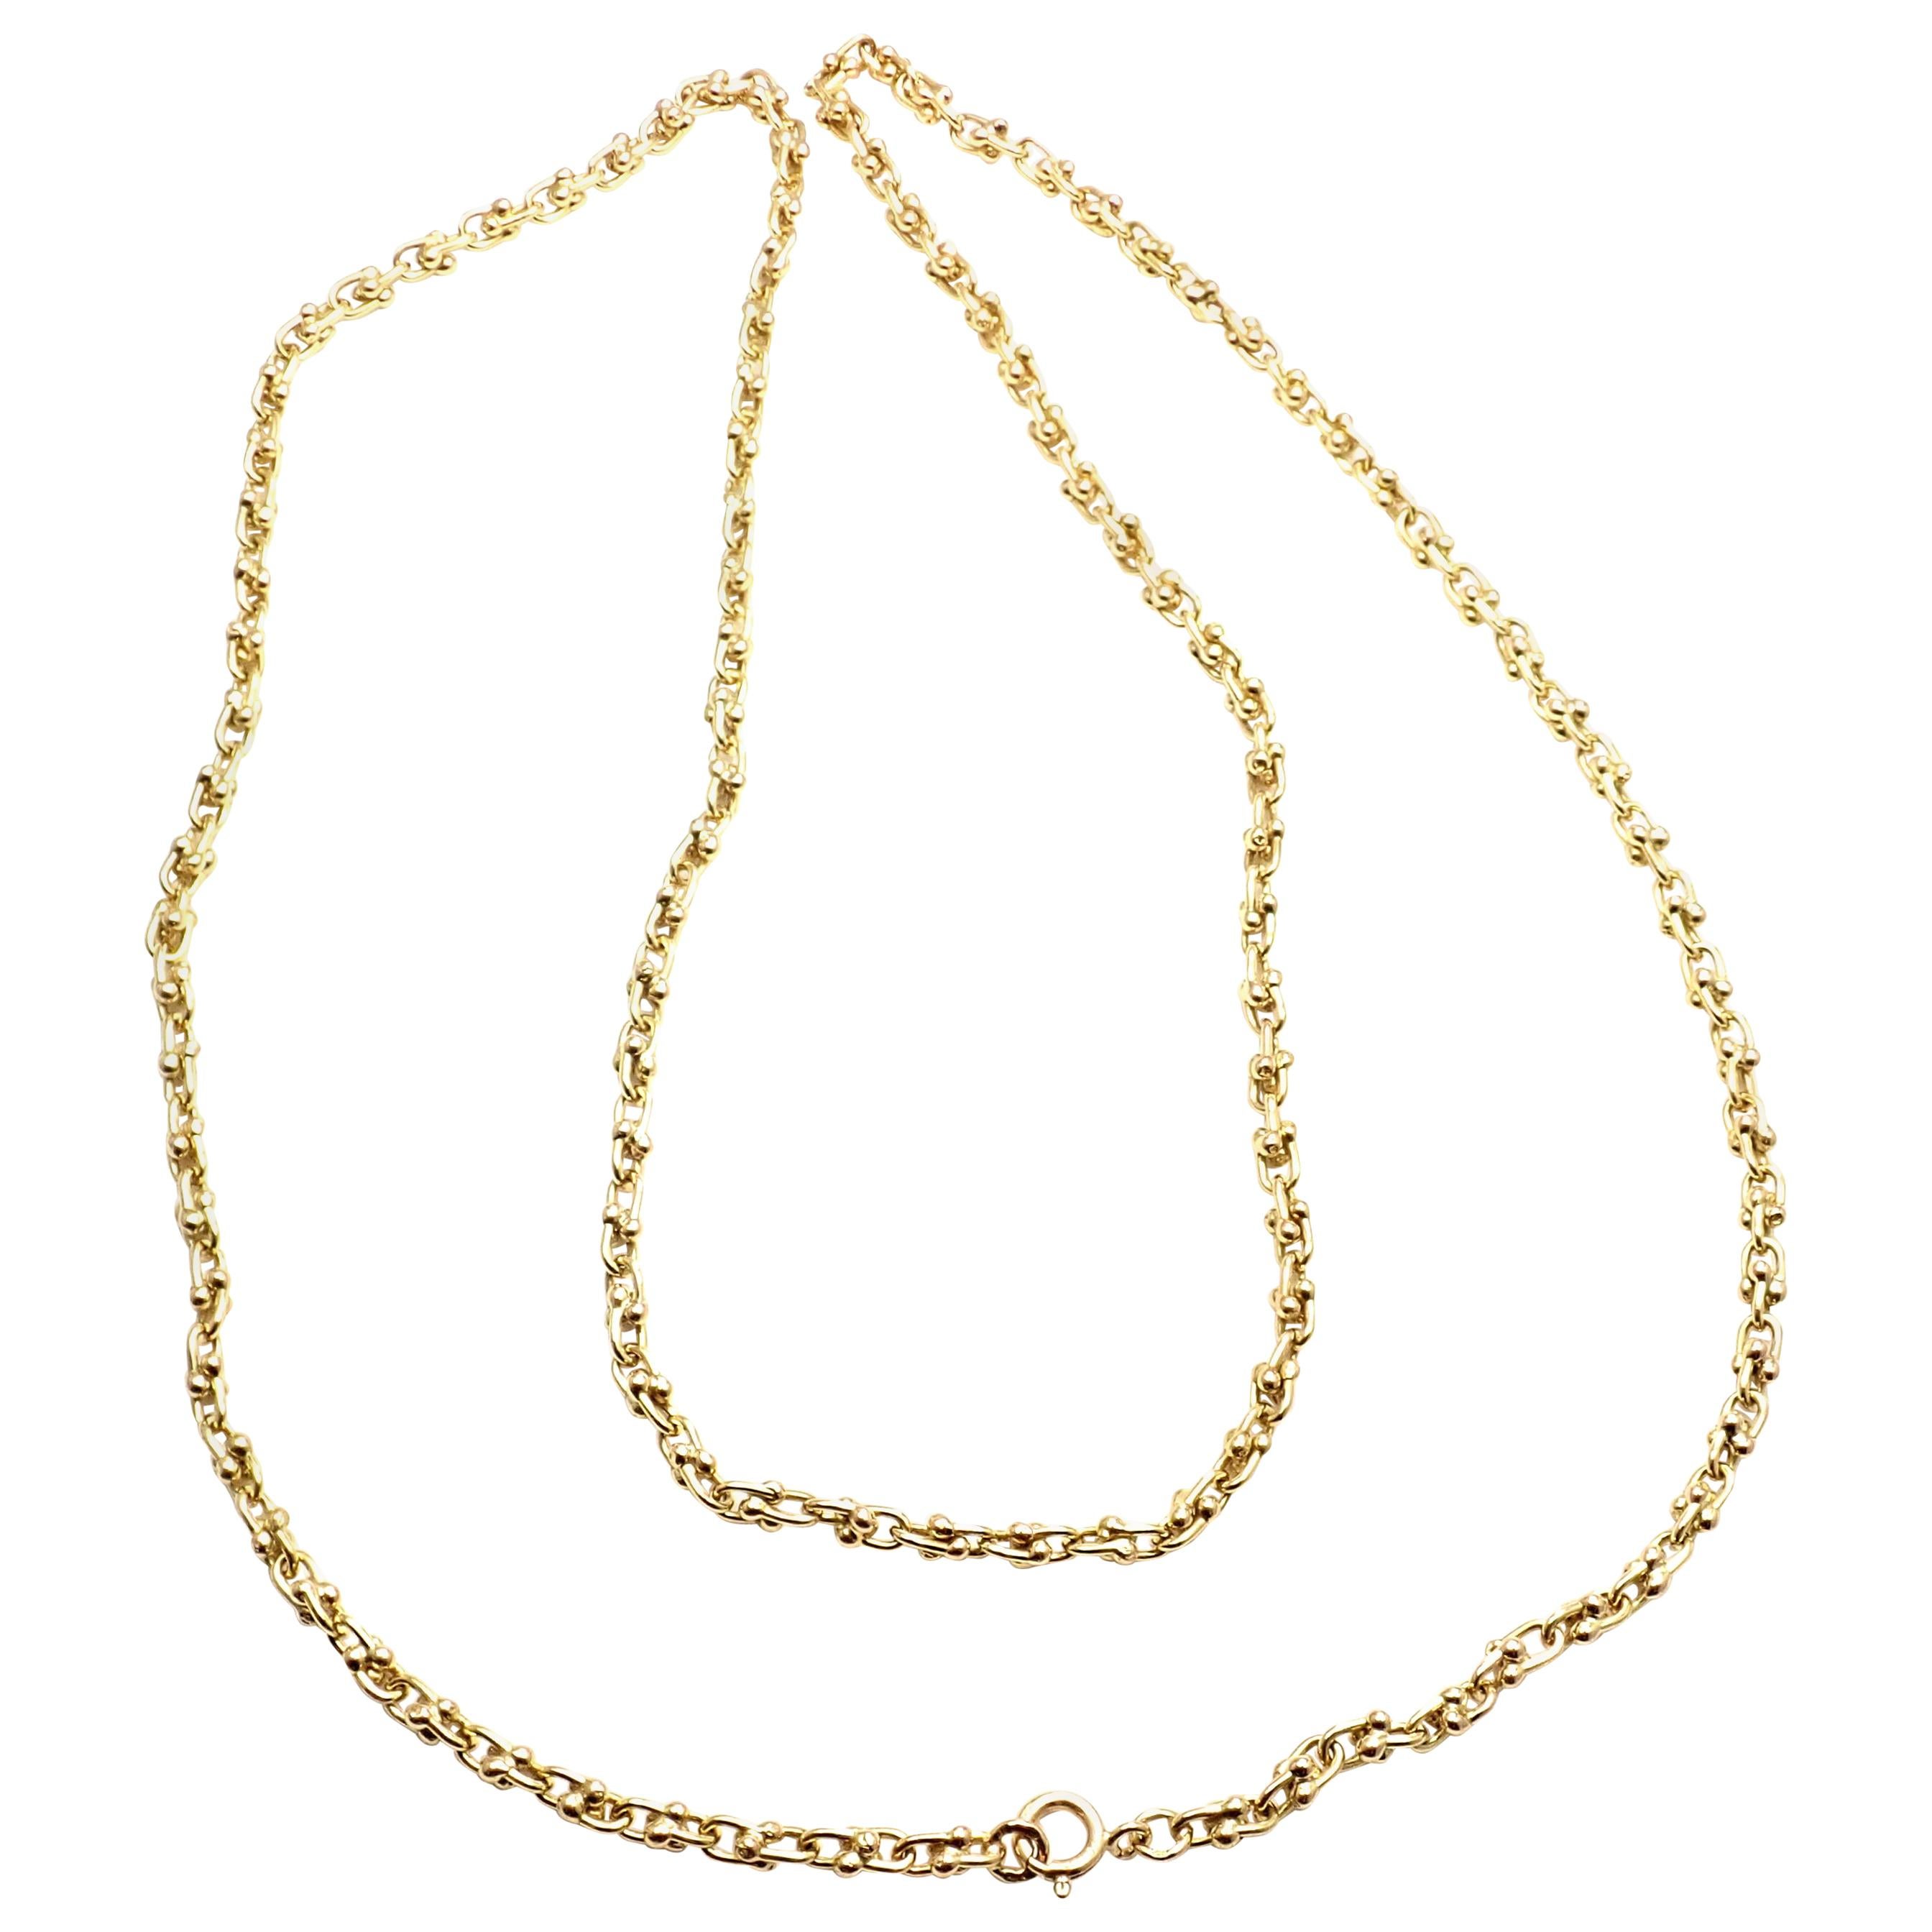 Vintage Van Cleef & Arpels Long Link Yellow Gold Chain Necklace